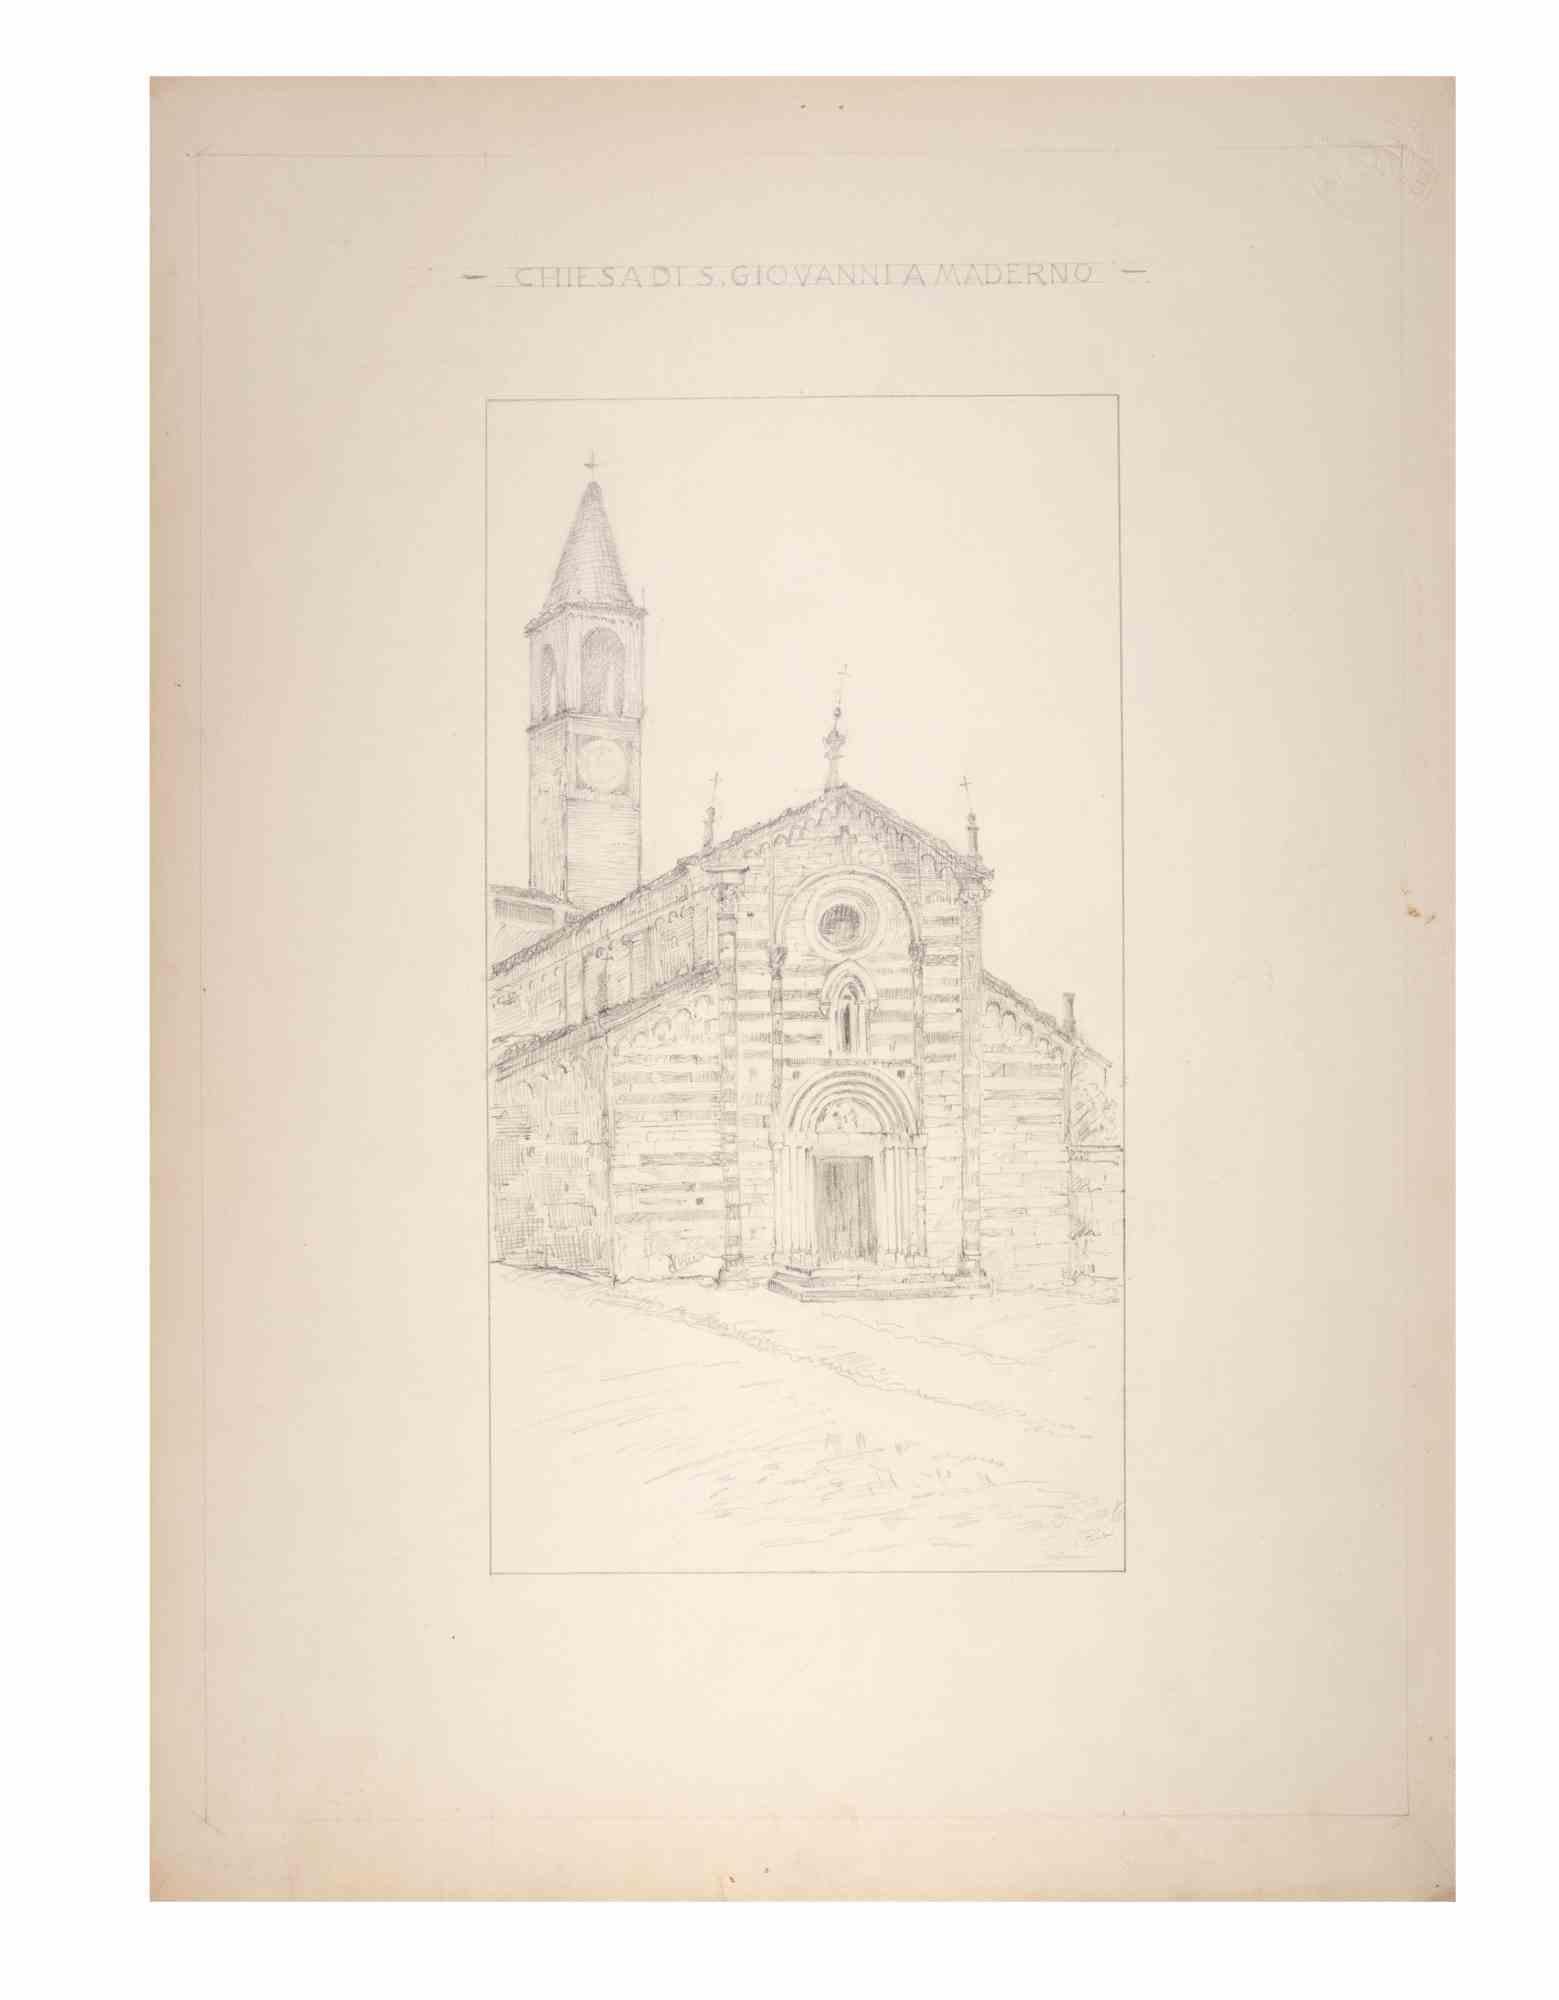 Chiesa di S. Giovanni A. Maderno is an Artwork realized by the Italian Artist Aurelio Mistruzzi in 1905.

Pencil Drawing on paper.

Good conditions.

Aurelio Mistruzzi (1880-1960) studied at the Udine Art School, having classes with the Sculptor De